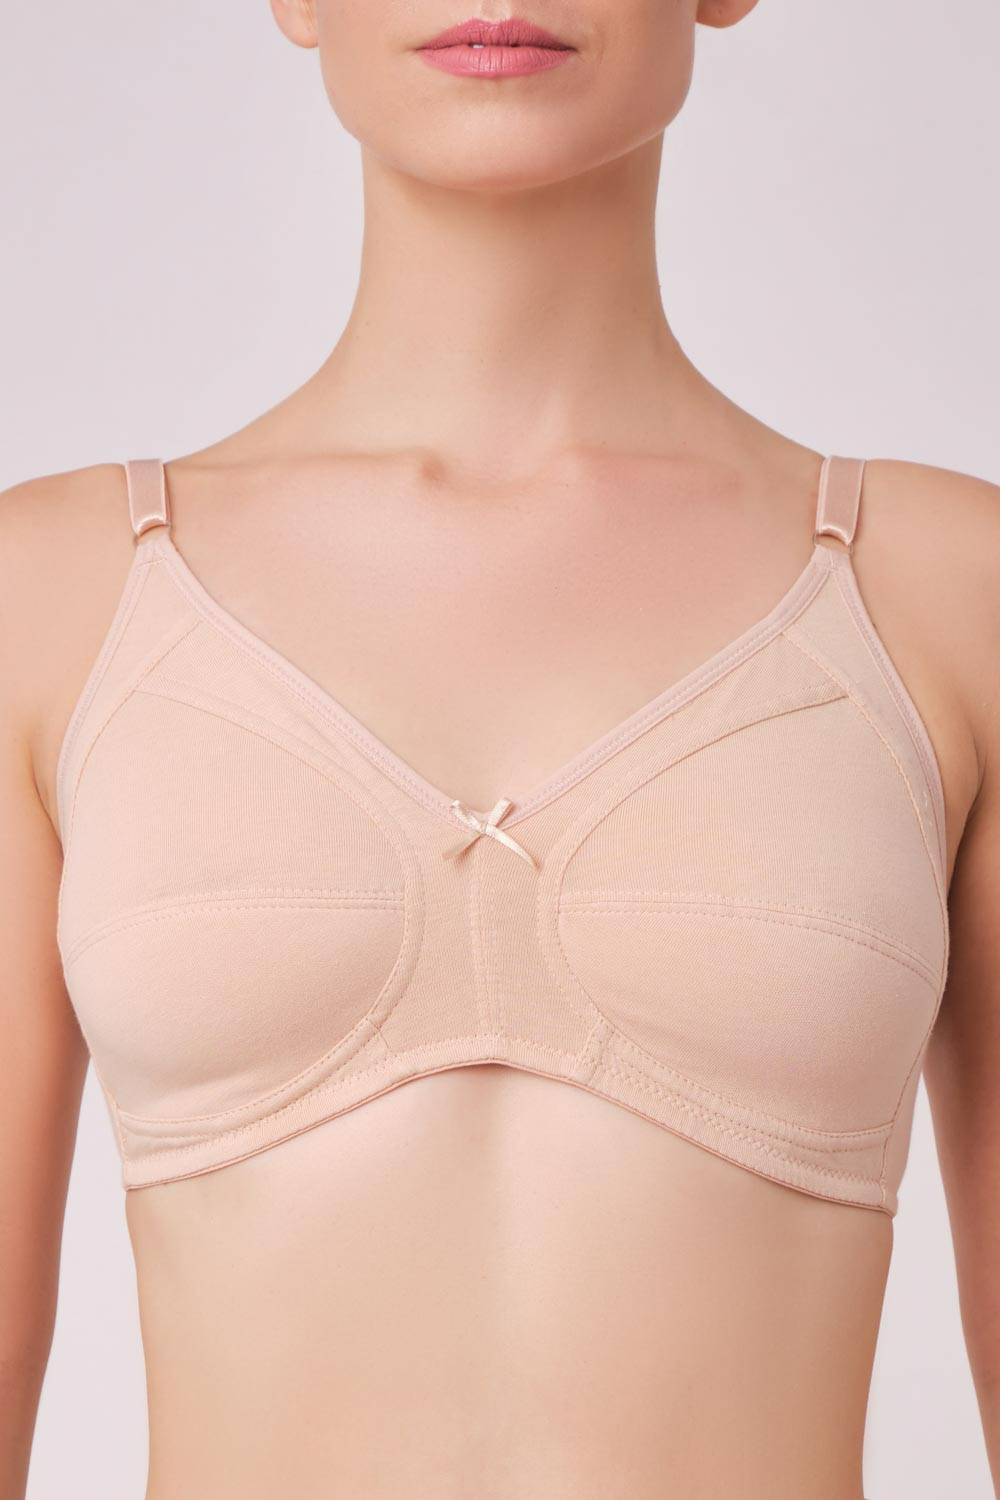 Odel Non Wired unlined Nude Color Cotton Bra